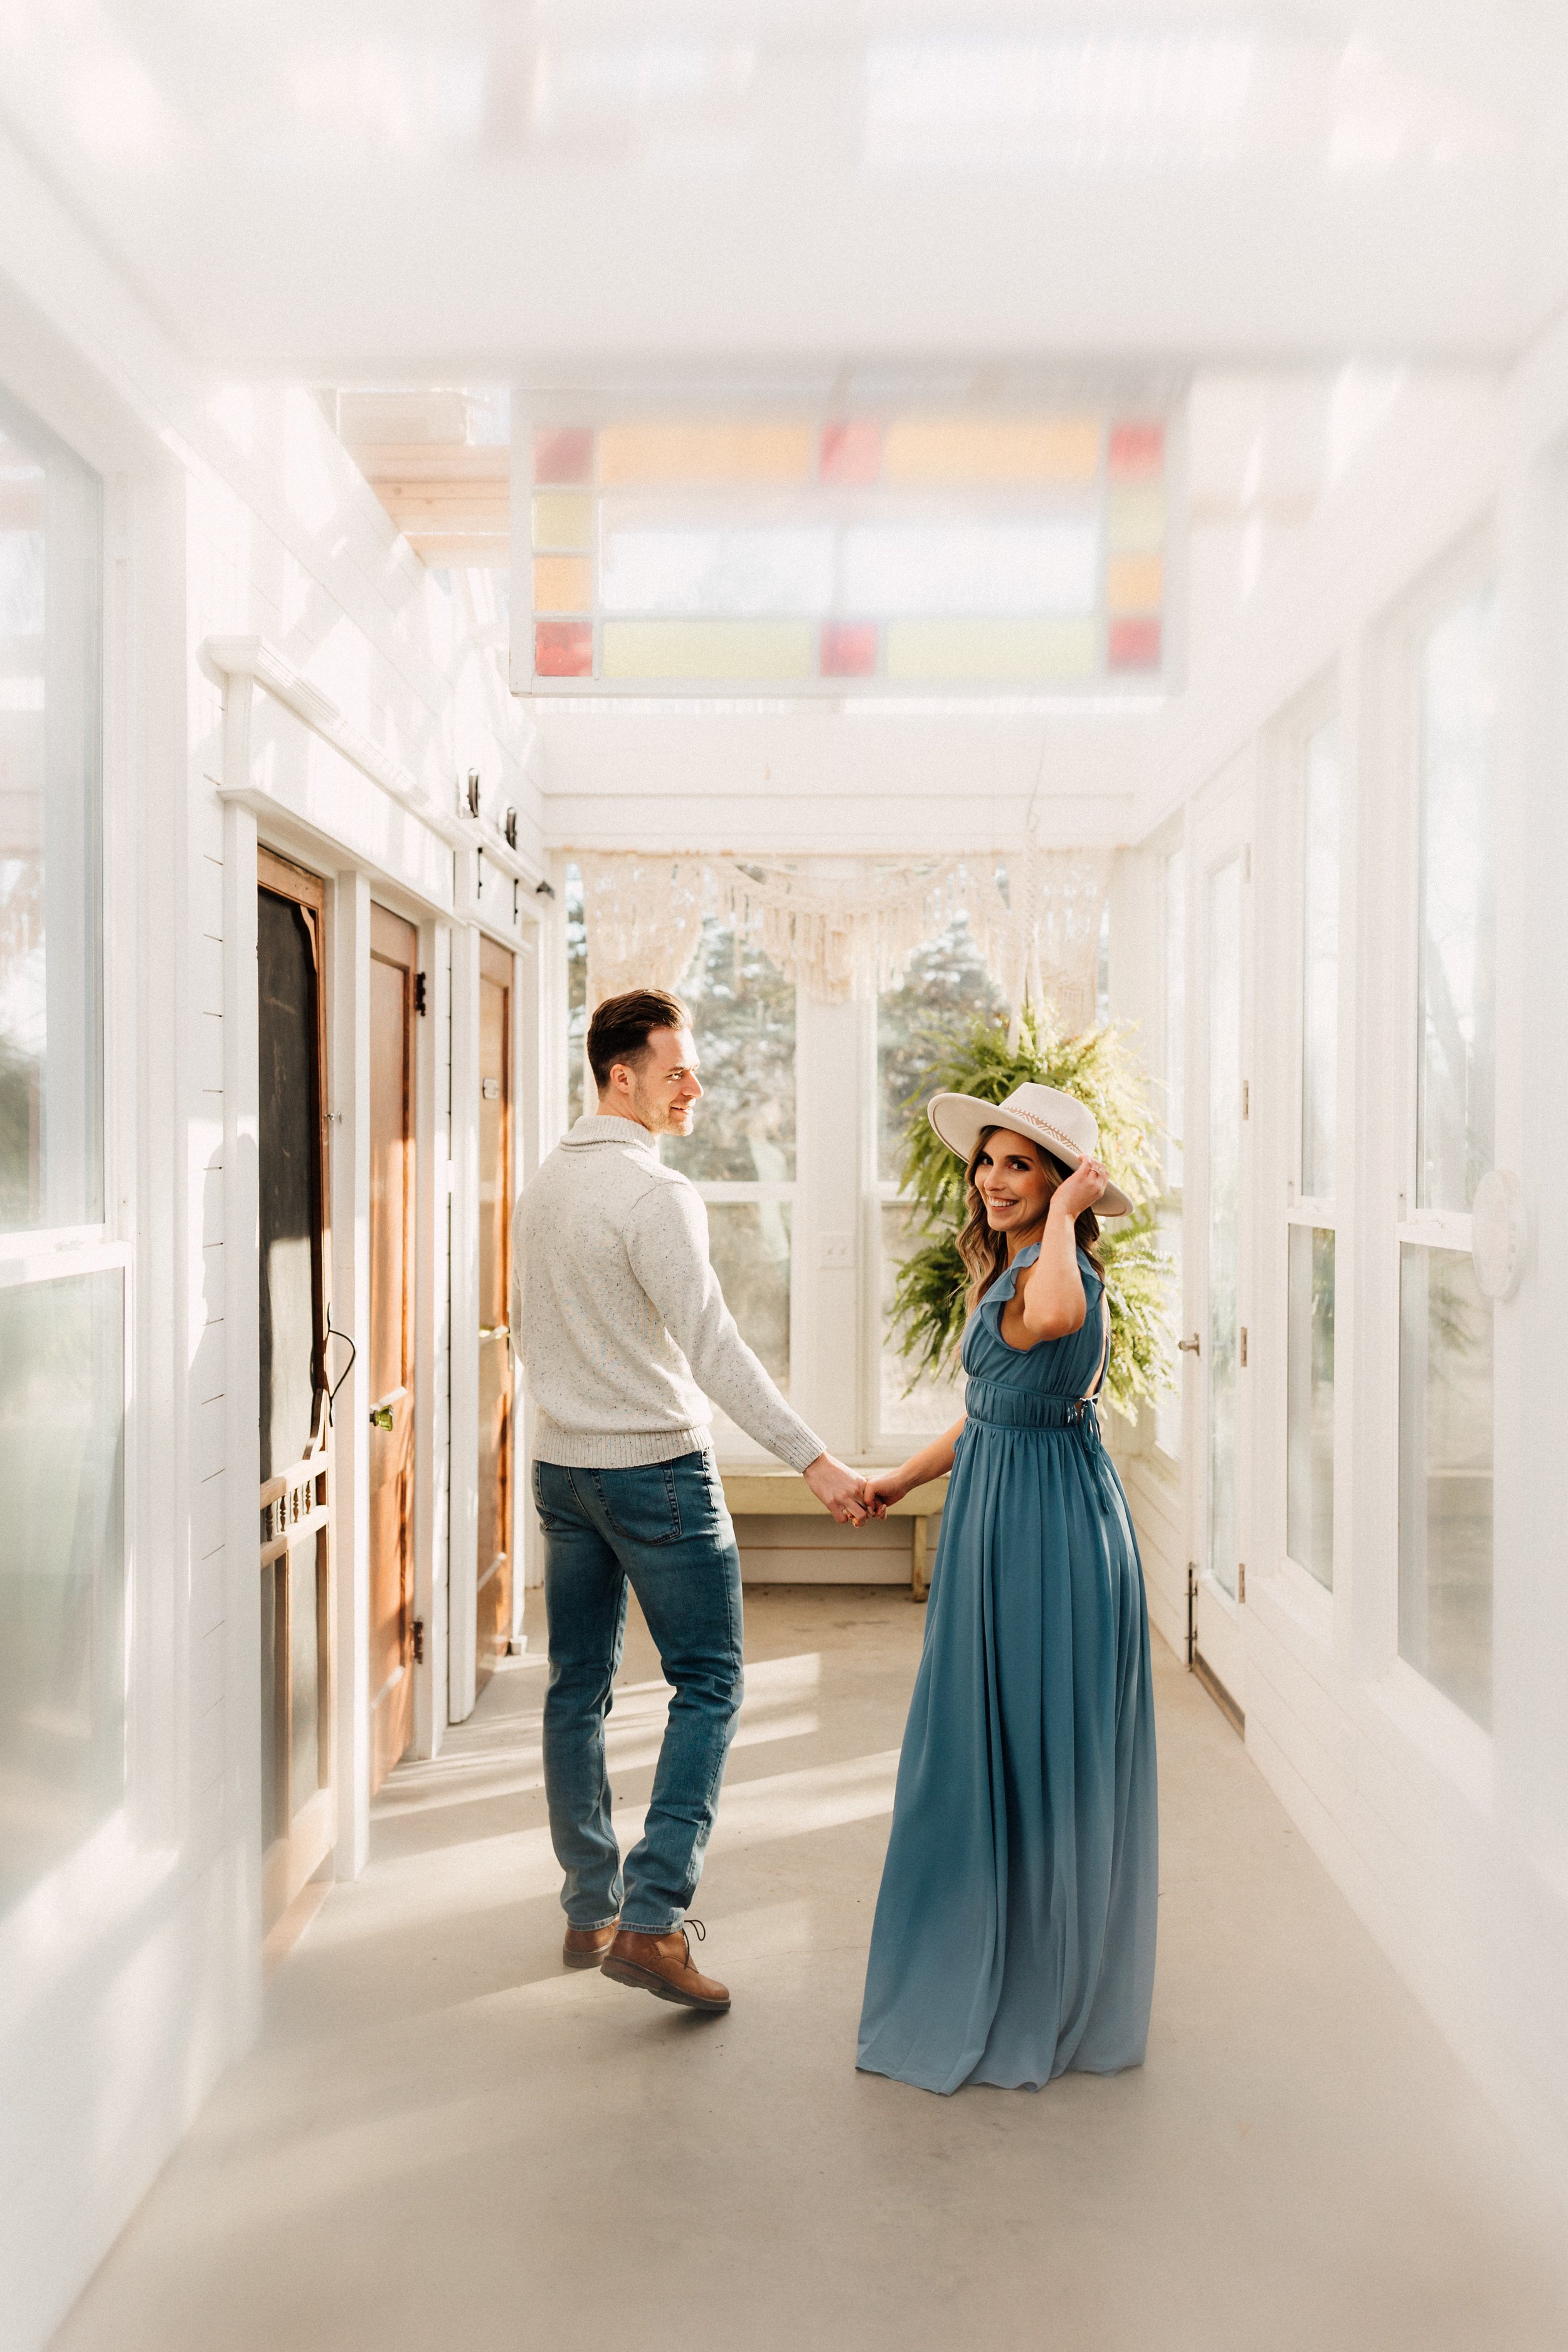 Laura_Ben_Engagment_Session_Winterset_Des_moines_Iowa_Couples_Photographer_Iris_Aisle_Cabin_Conservatory_Candid_Snow_Day_Winter_KMP_Photography-9114.jpg